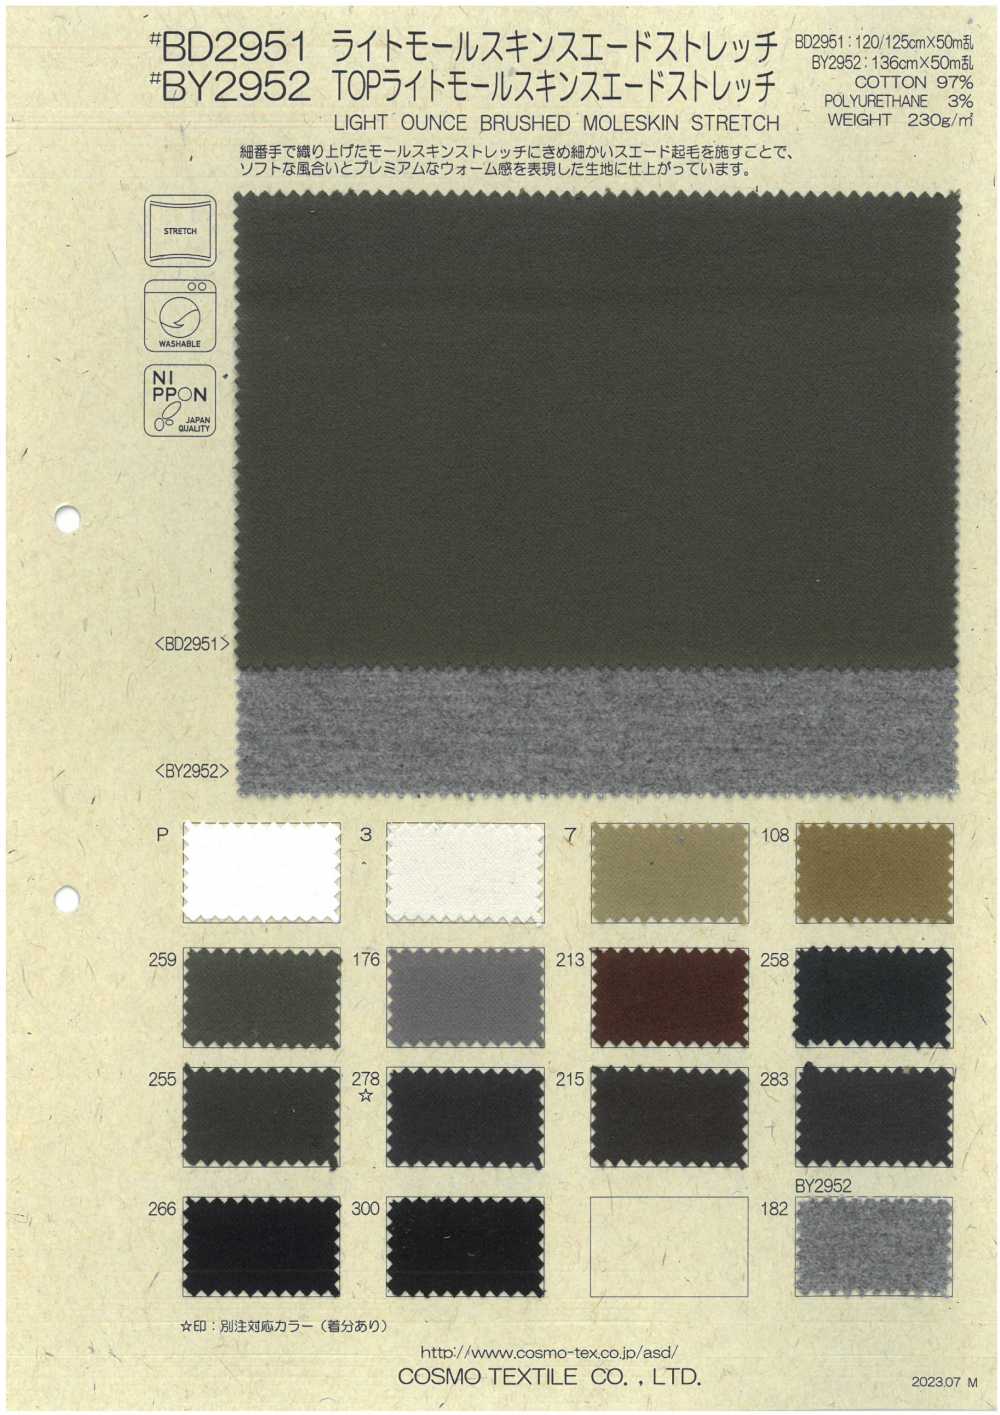 BD2951 Light Moleskin Stretch PTJ Recommended Part Number[Textile / Fabric] COSMO TEXTILE